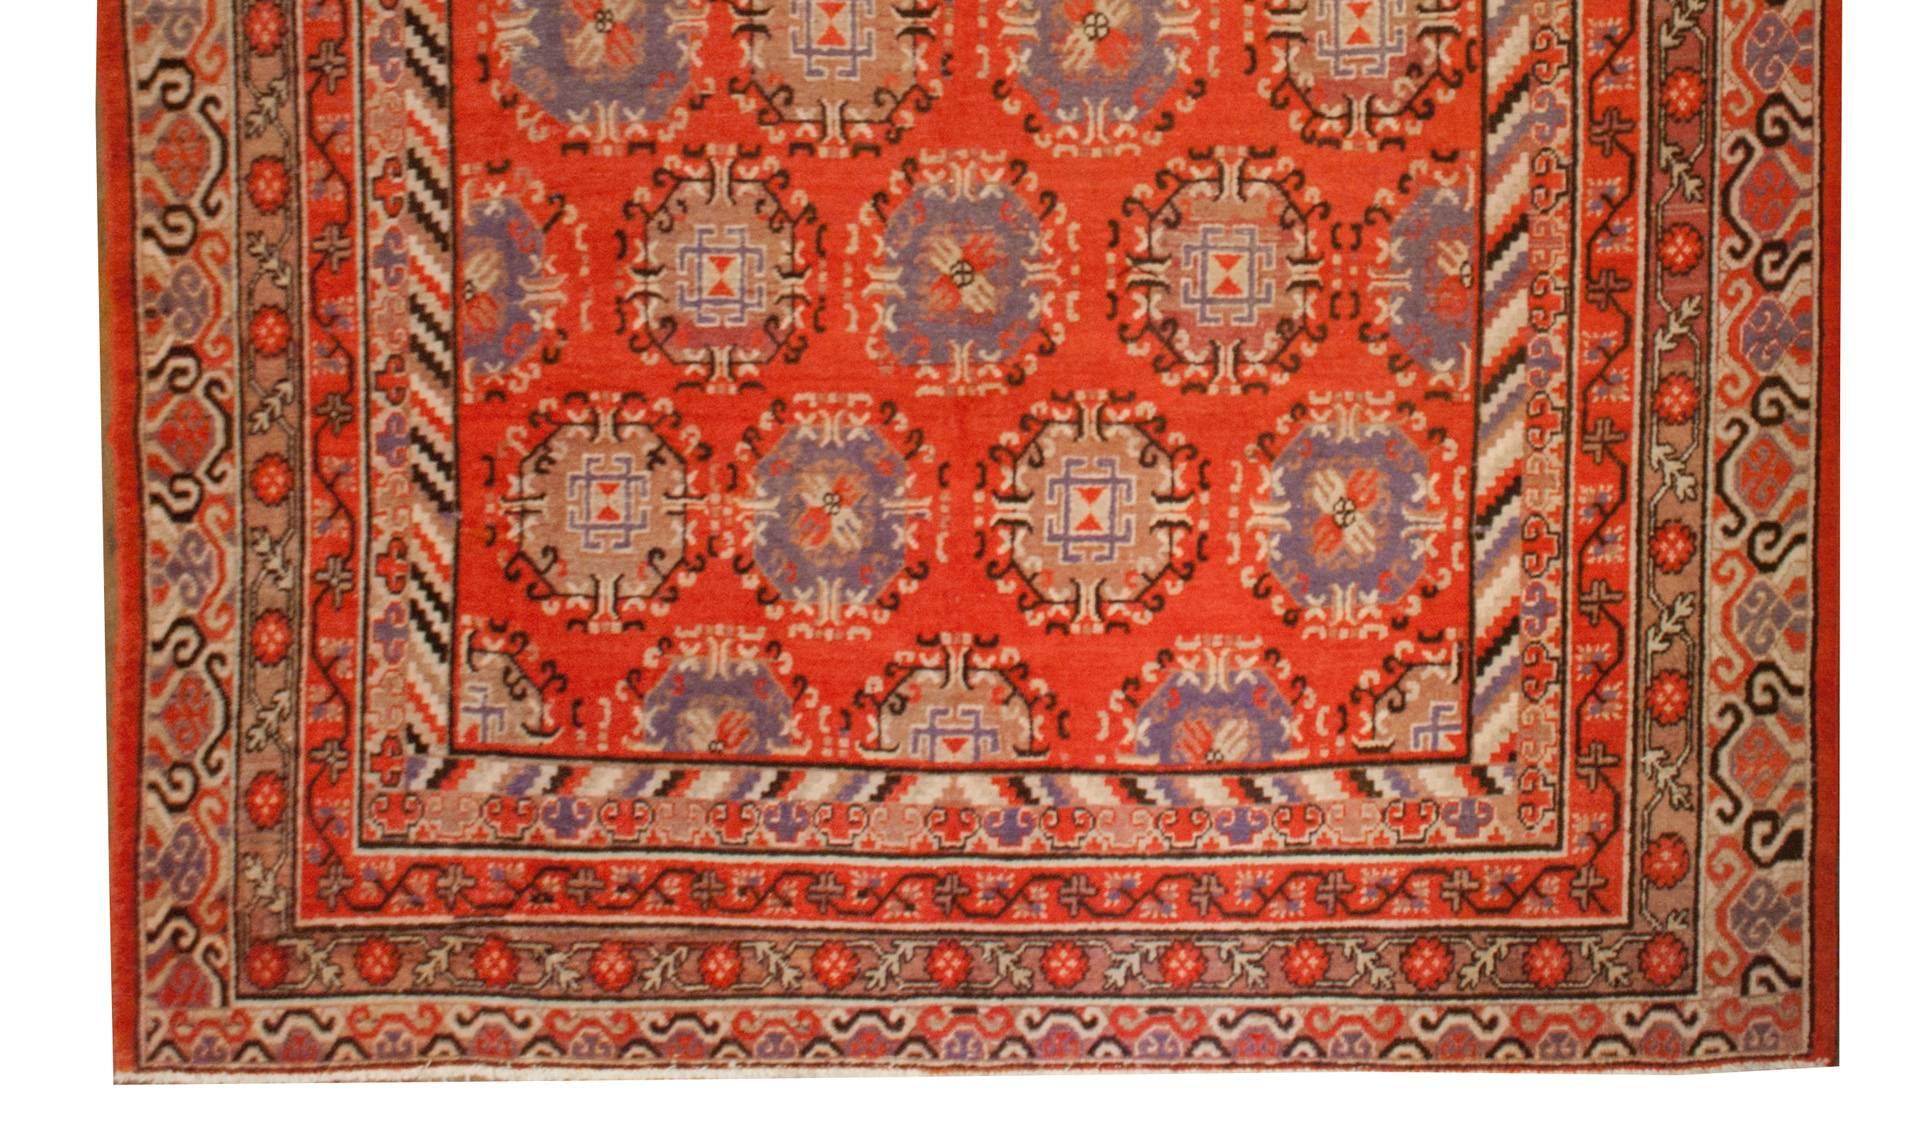 An early 20th century Central Asian Khotan rug with multiple geometric medallions of alternating pale and dark lavender, creating diagonal stripes across the field, all on a rich rusty red background. The border is comprised of multiple thin borders